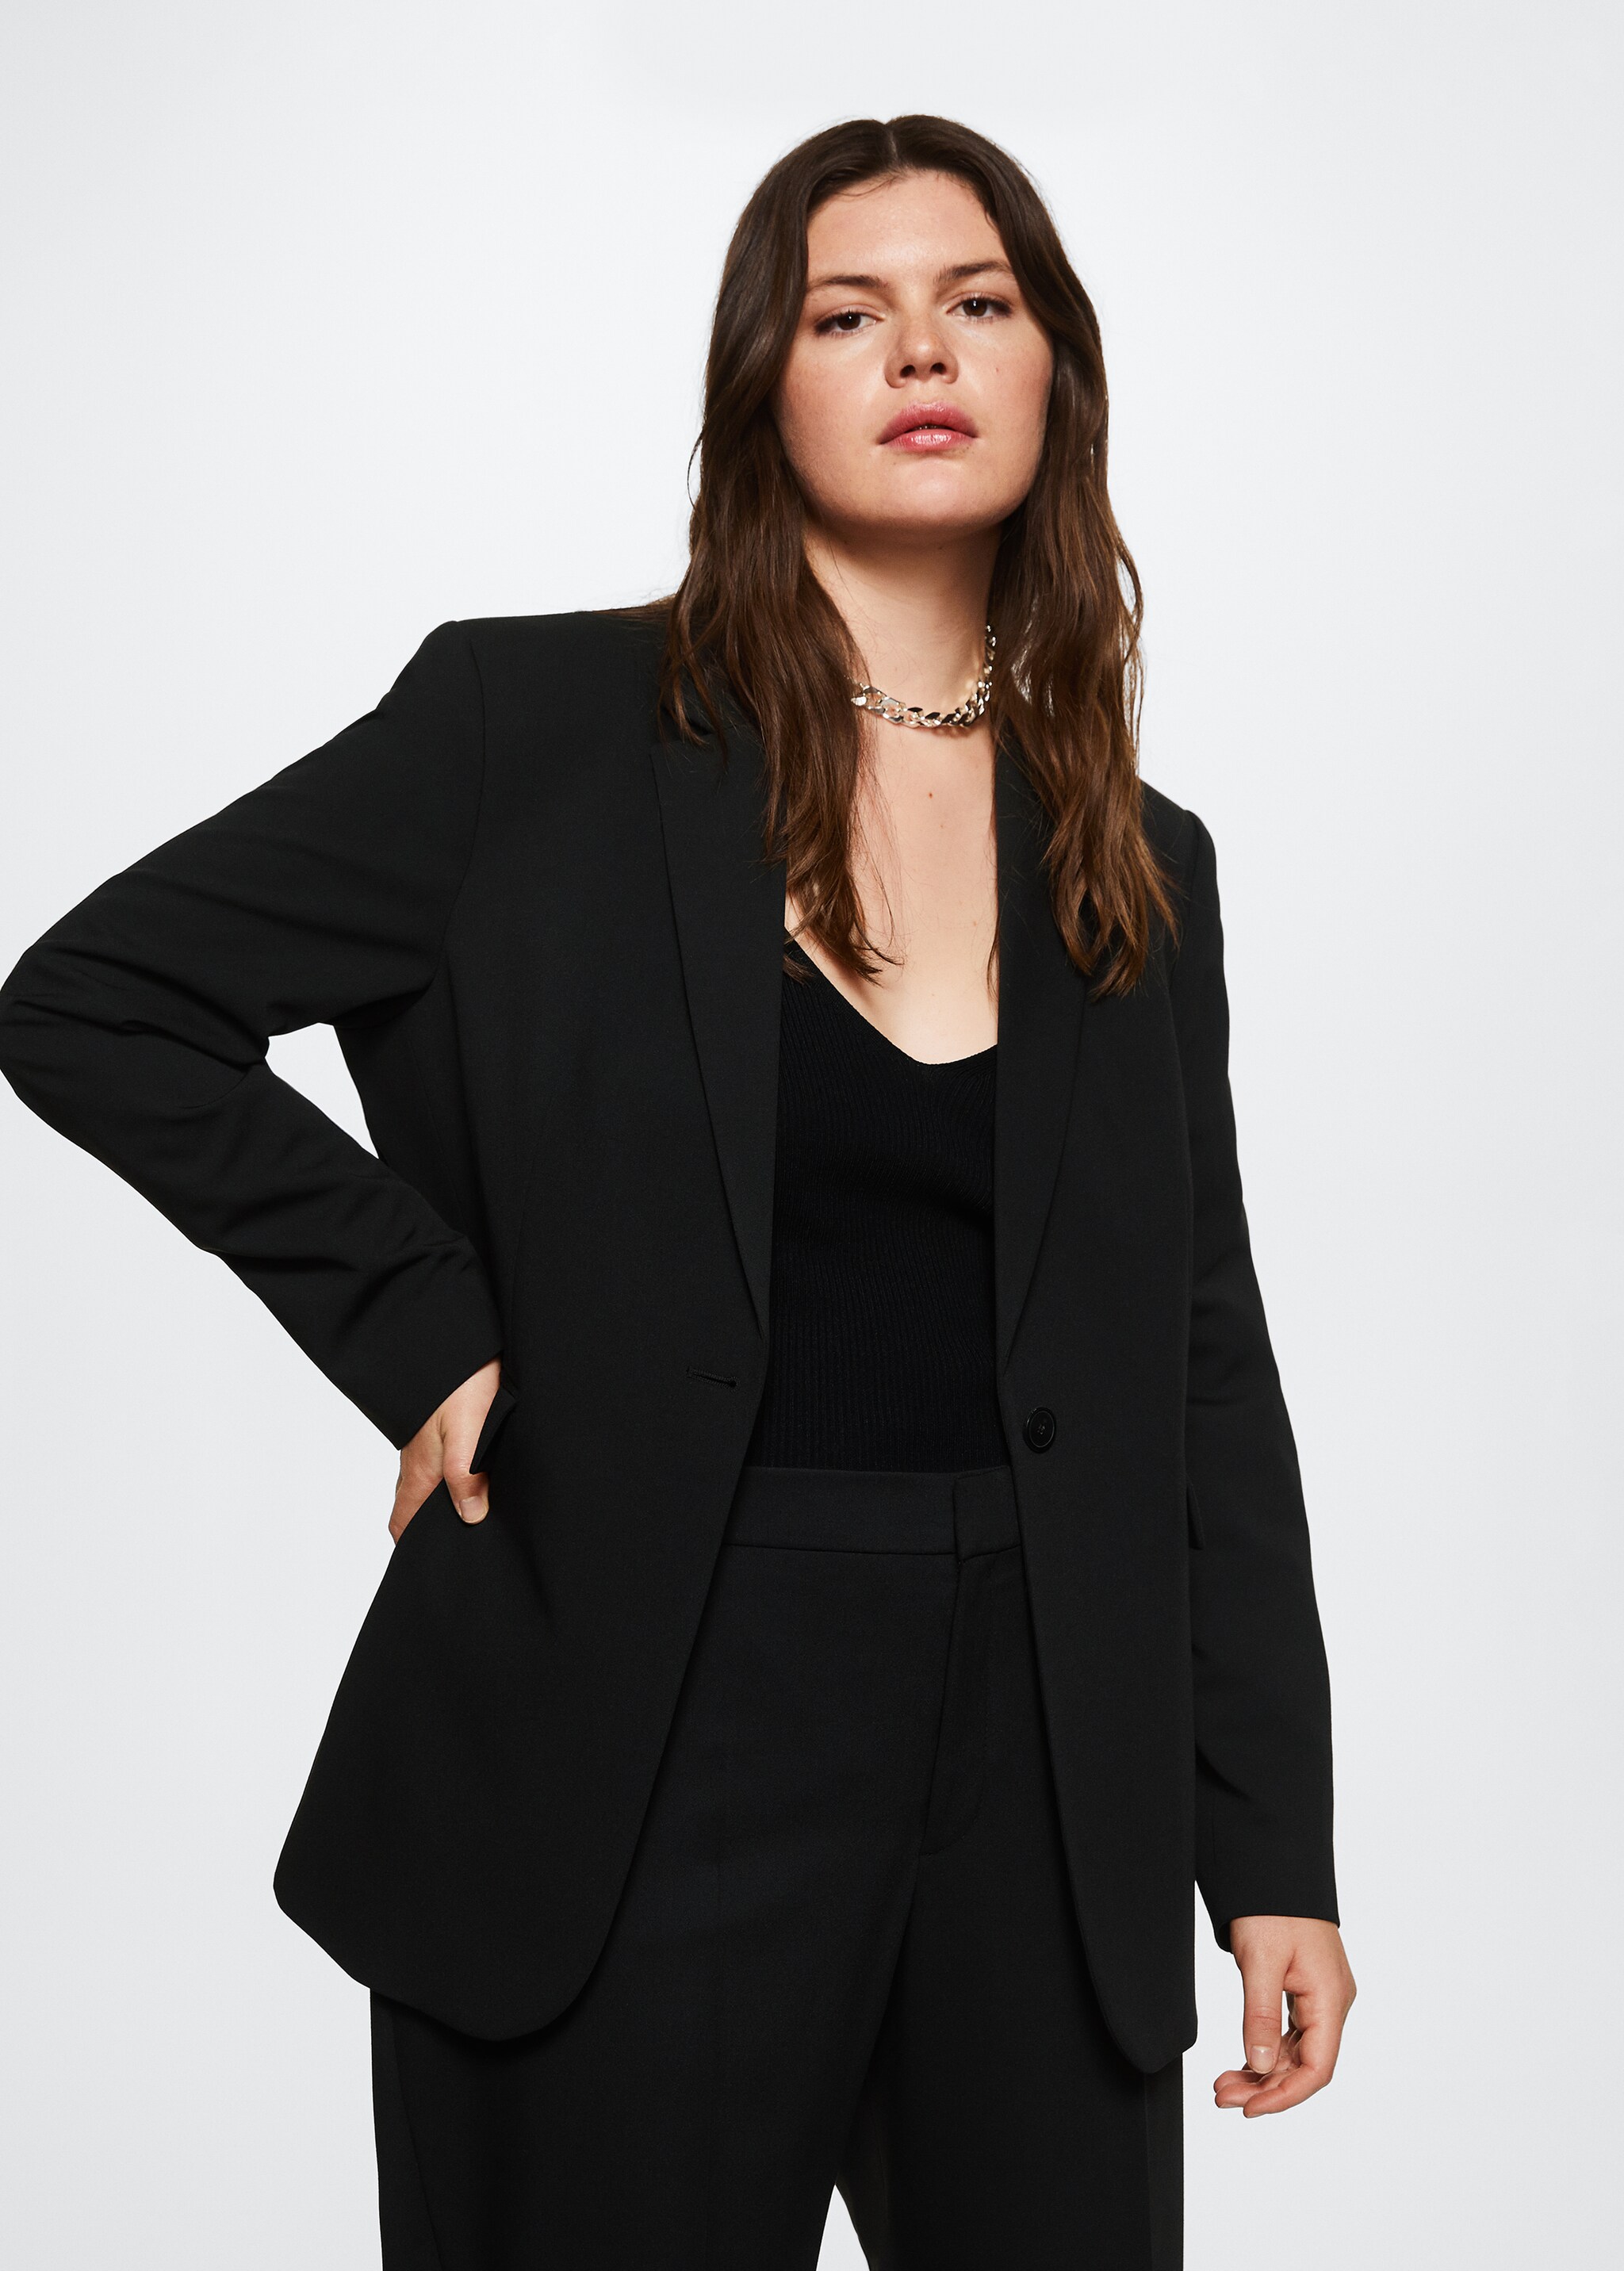 Fitted suit jacket - Details of the article 6